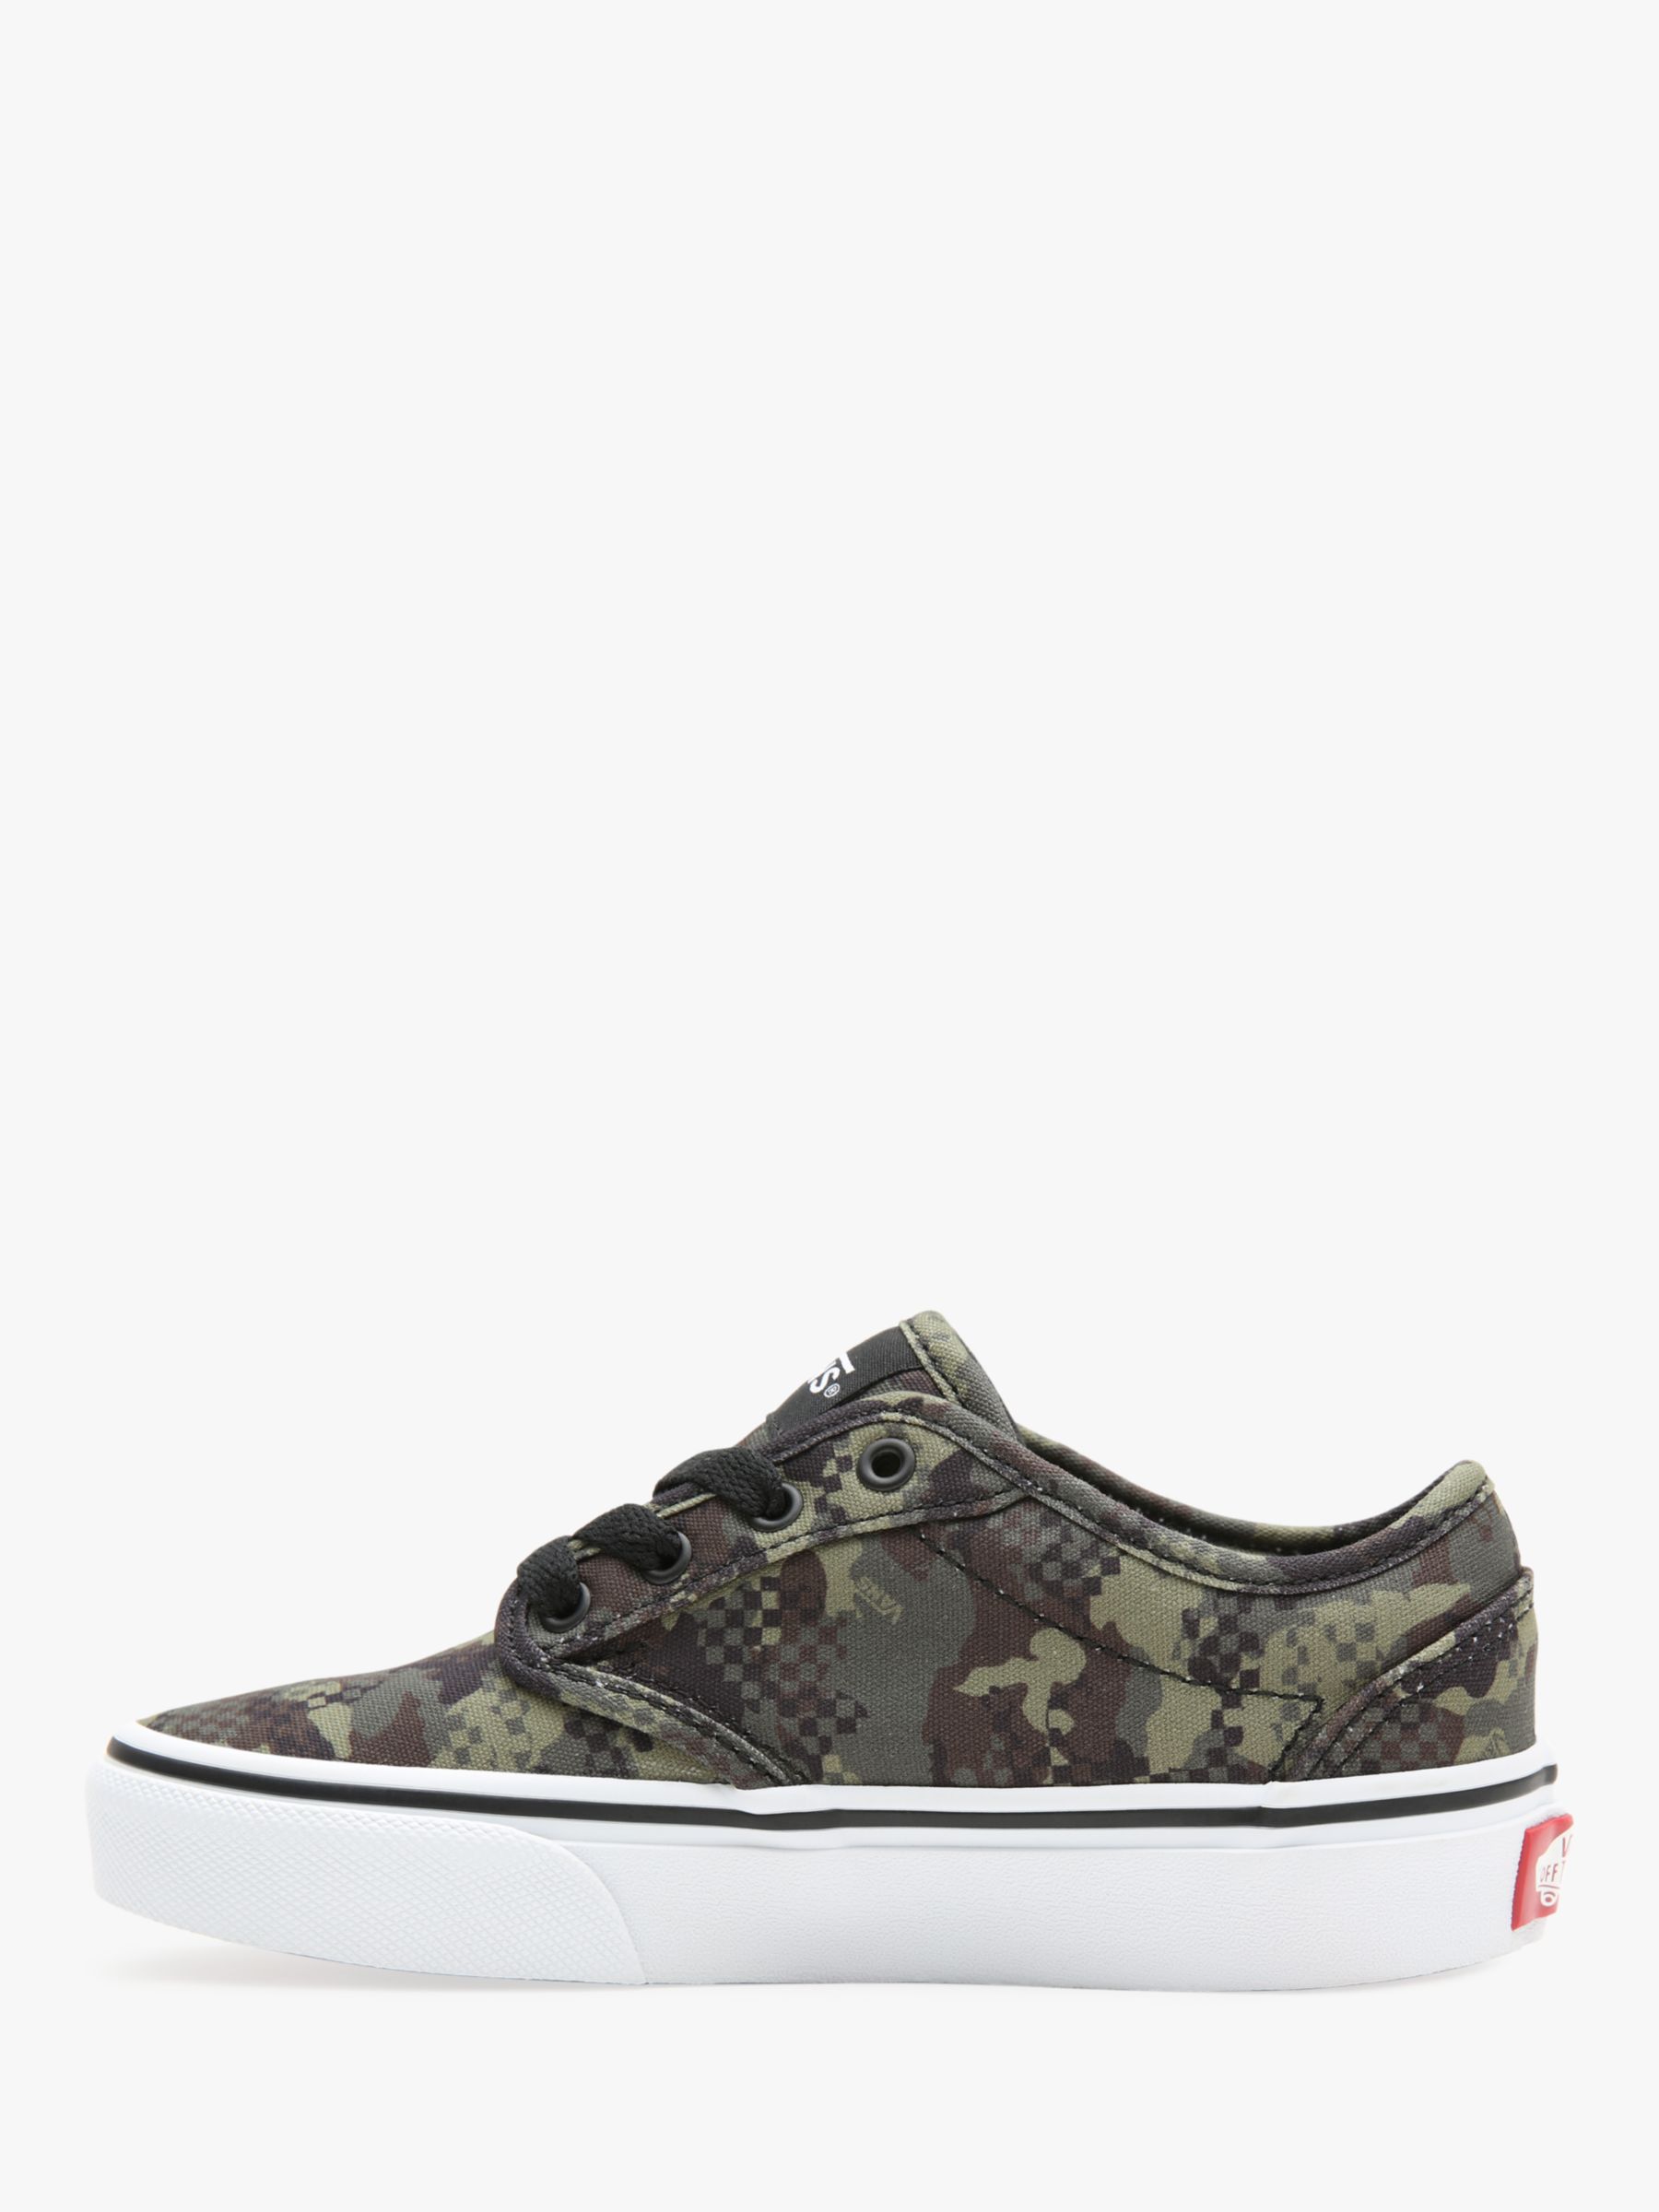 Vans Children's Atwood Mixed Camo Canvas Trainers